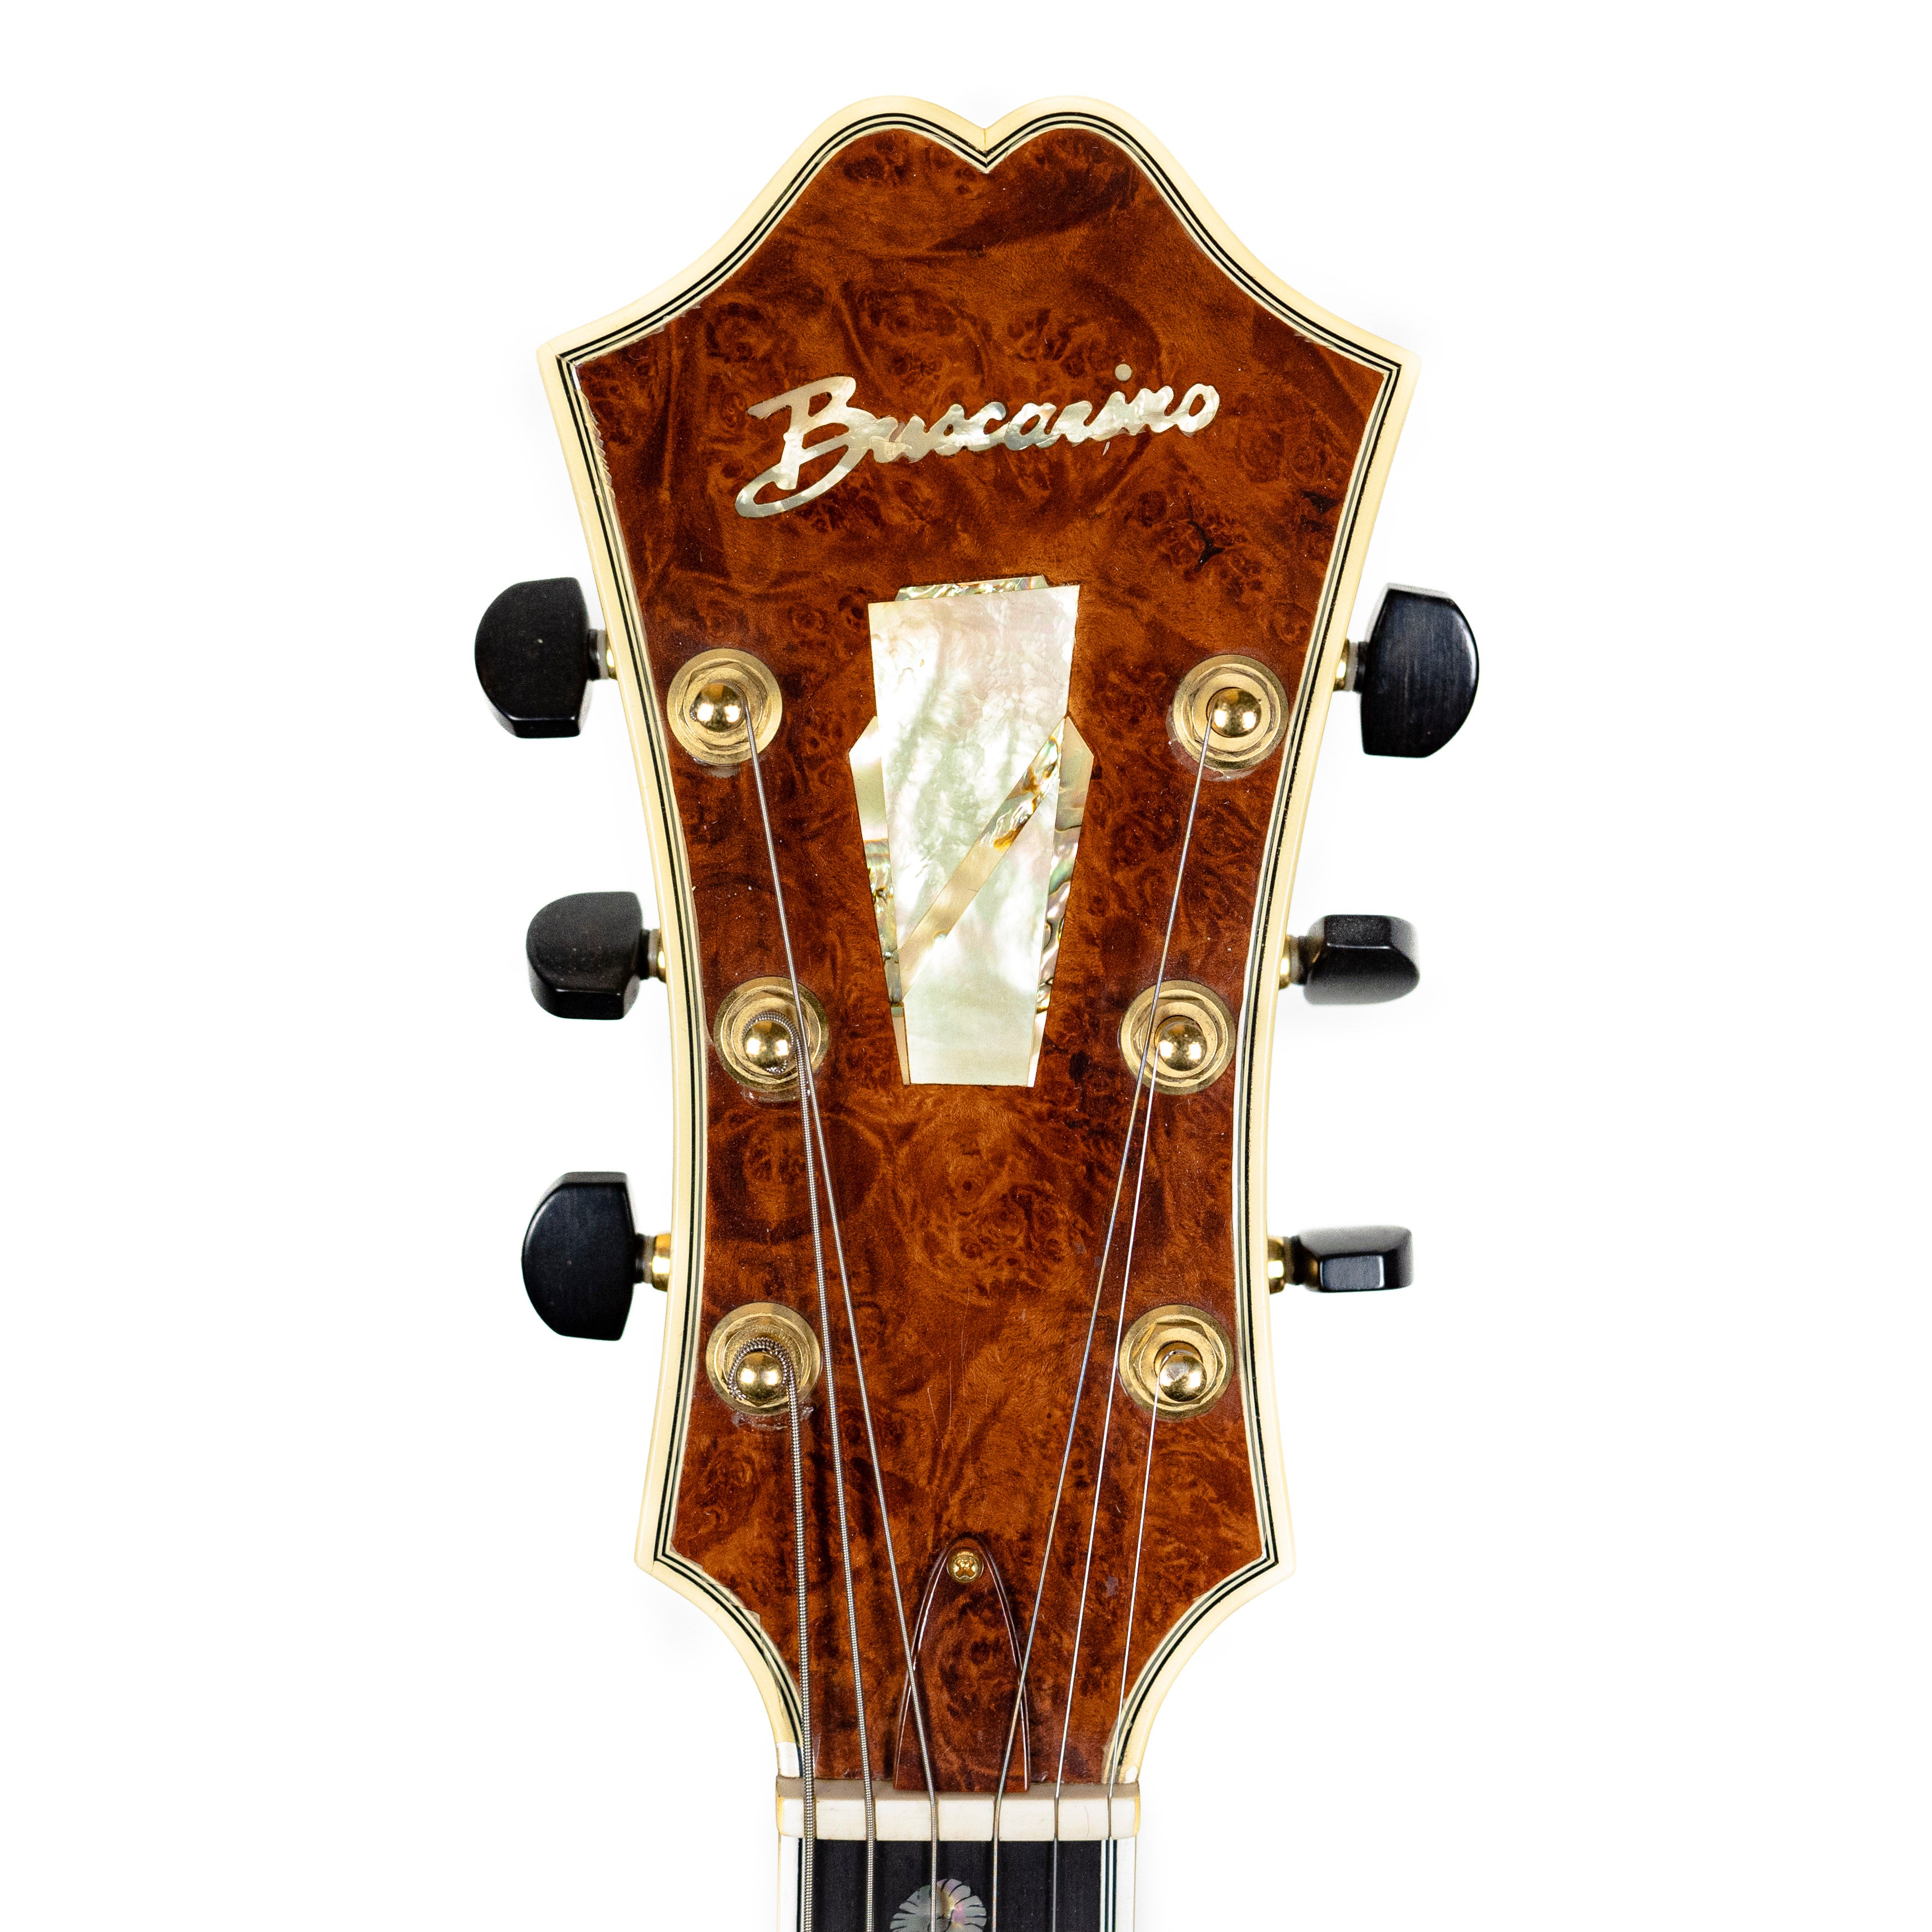 Buscarino 1995 17" Blonde, Sitka Spruce, Eastern Red Maple